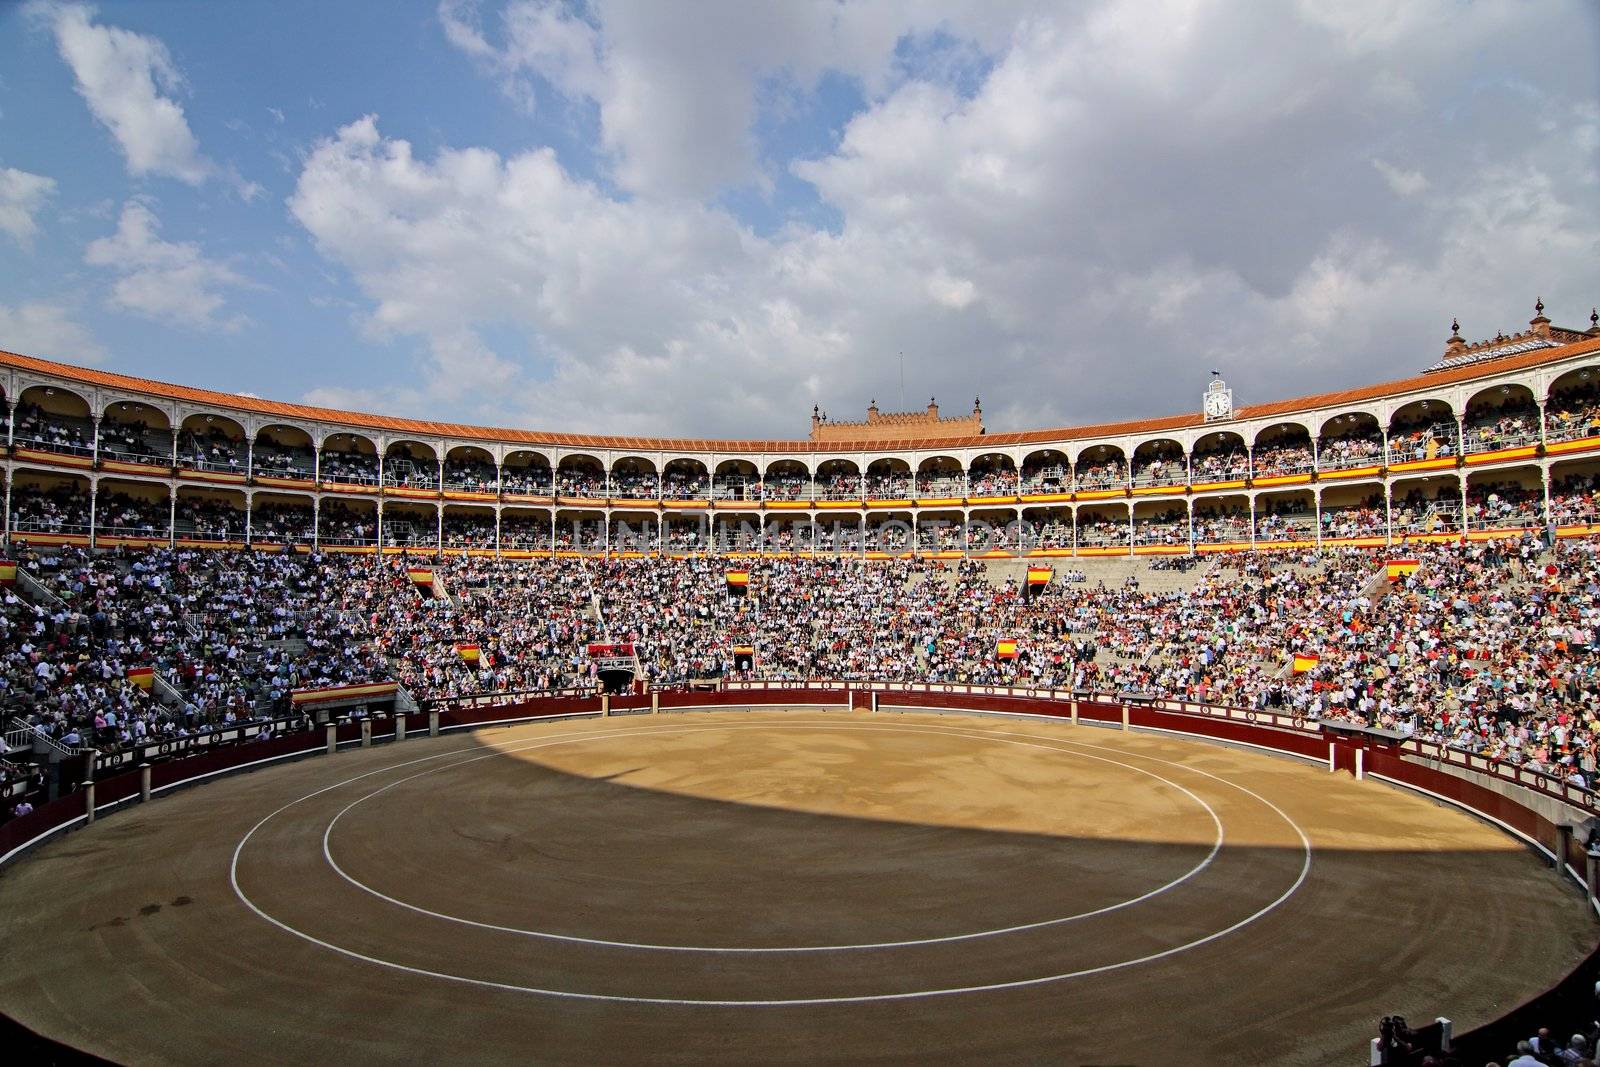 Las Ventas is perhaps the most important bullring in the world. Located in Madrid, Spain